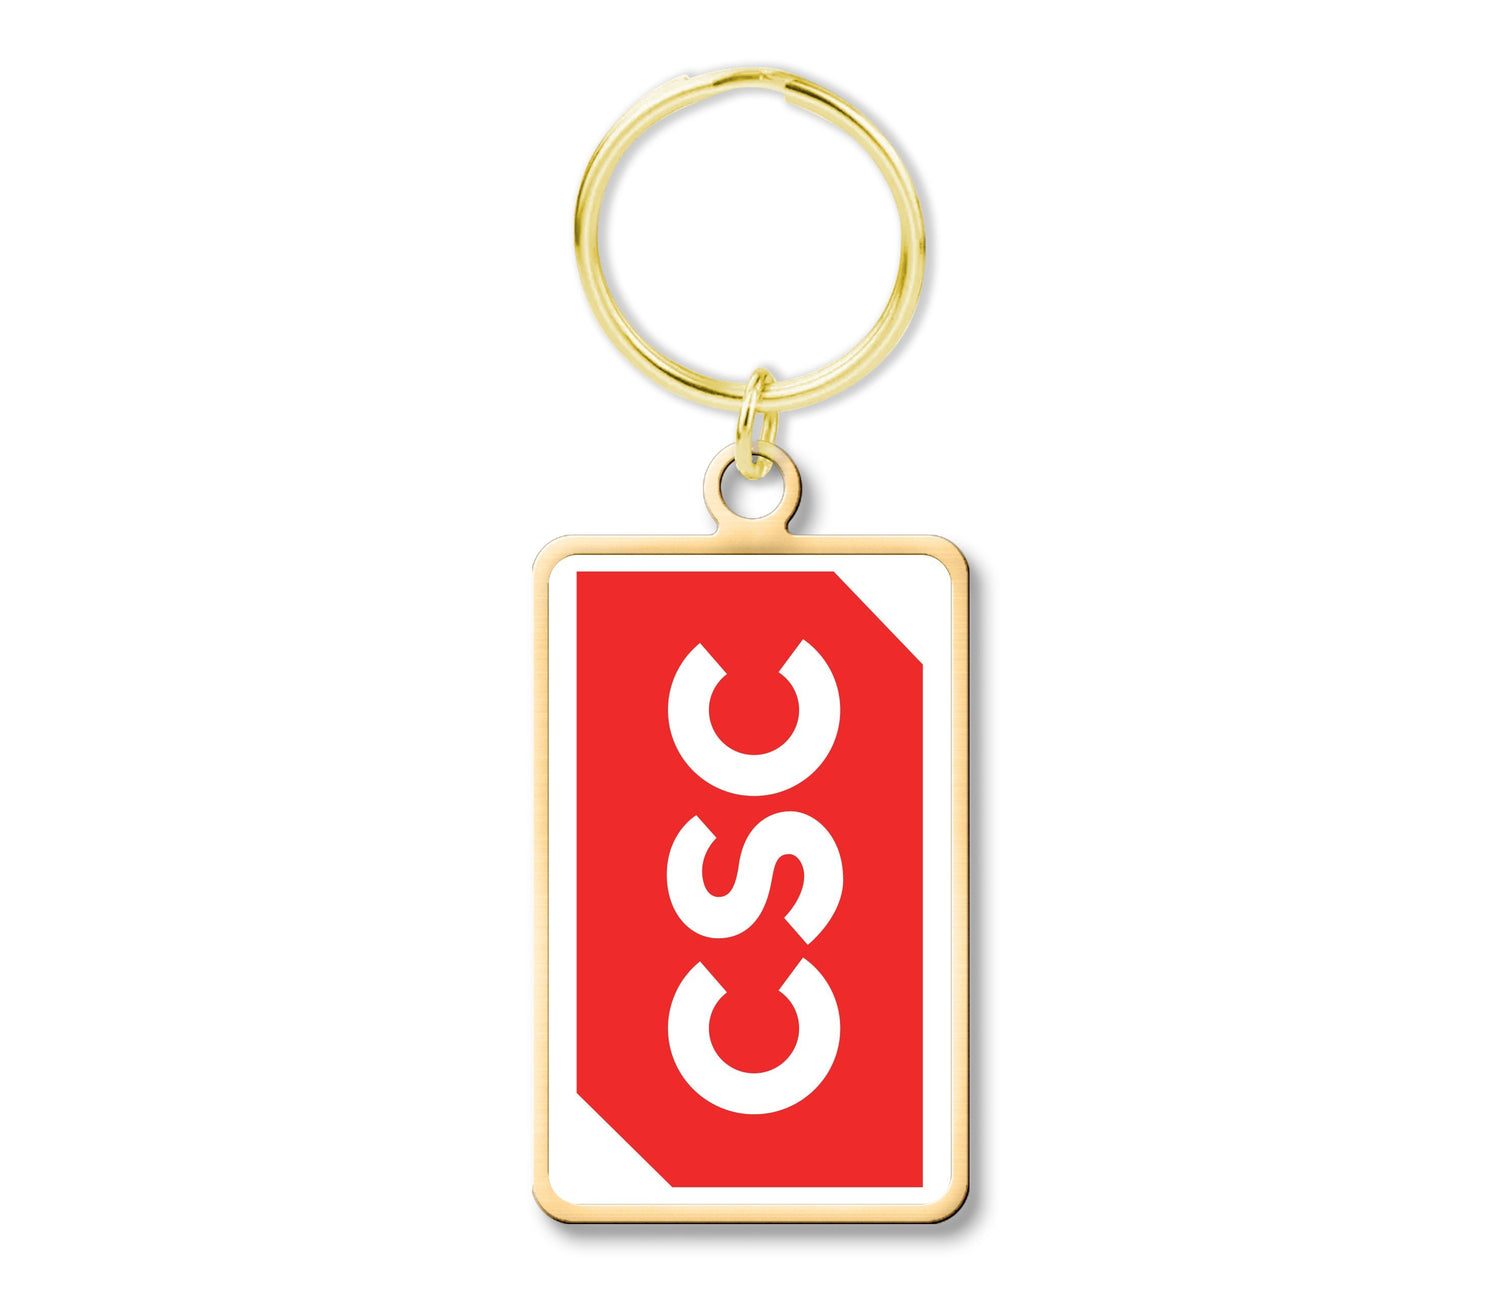 Custom Digitally Printed Made in USA Keychains Big Rectangle 1.7 in. x 1 in. Gold 